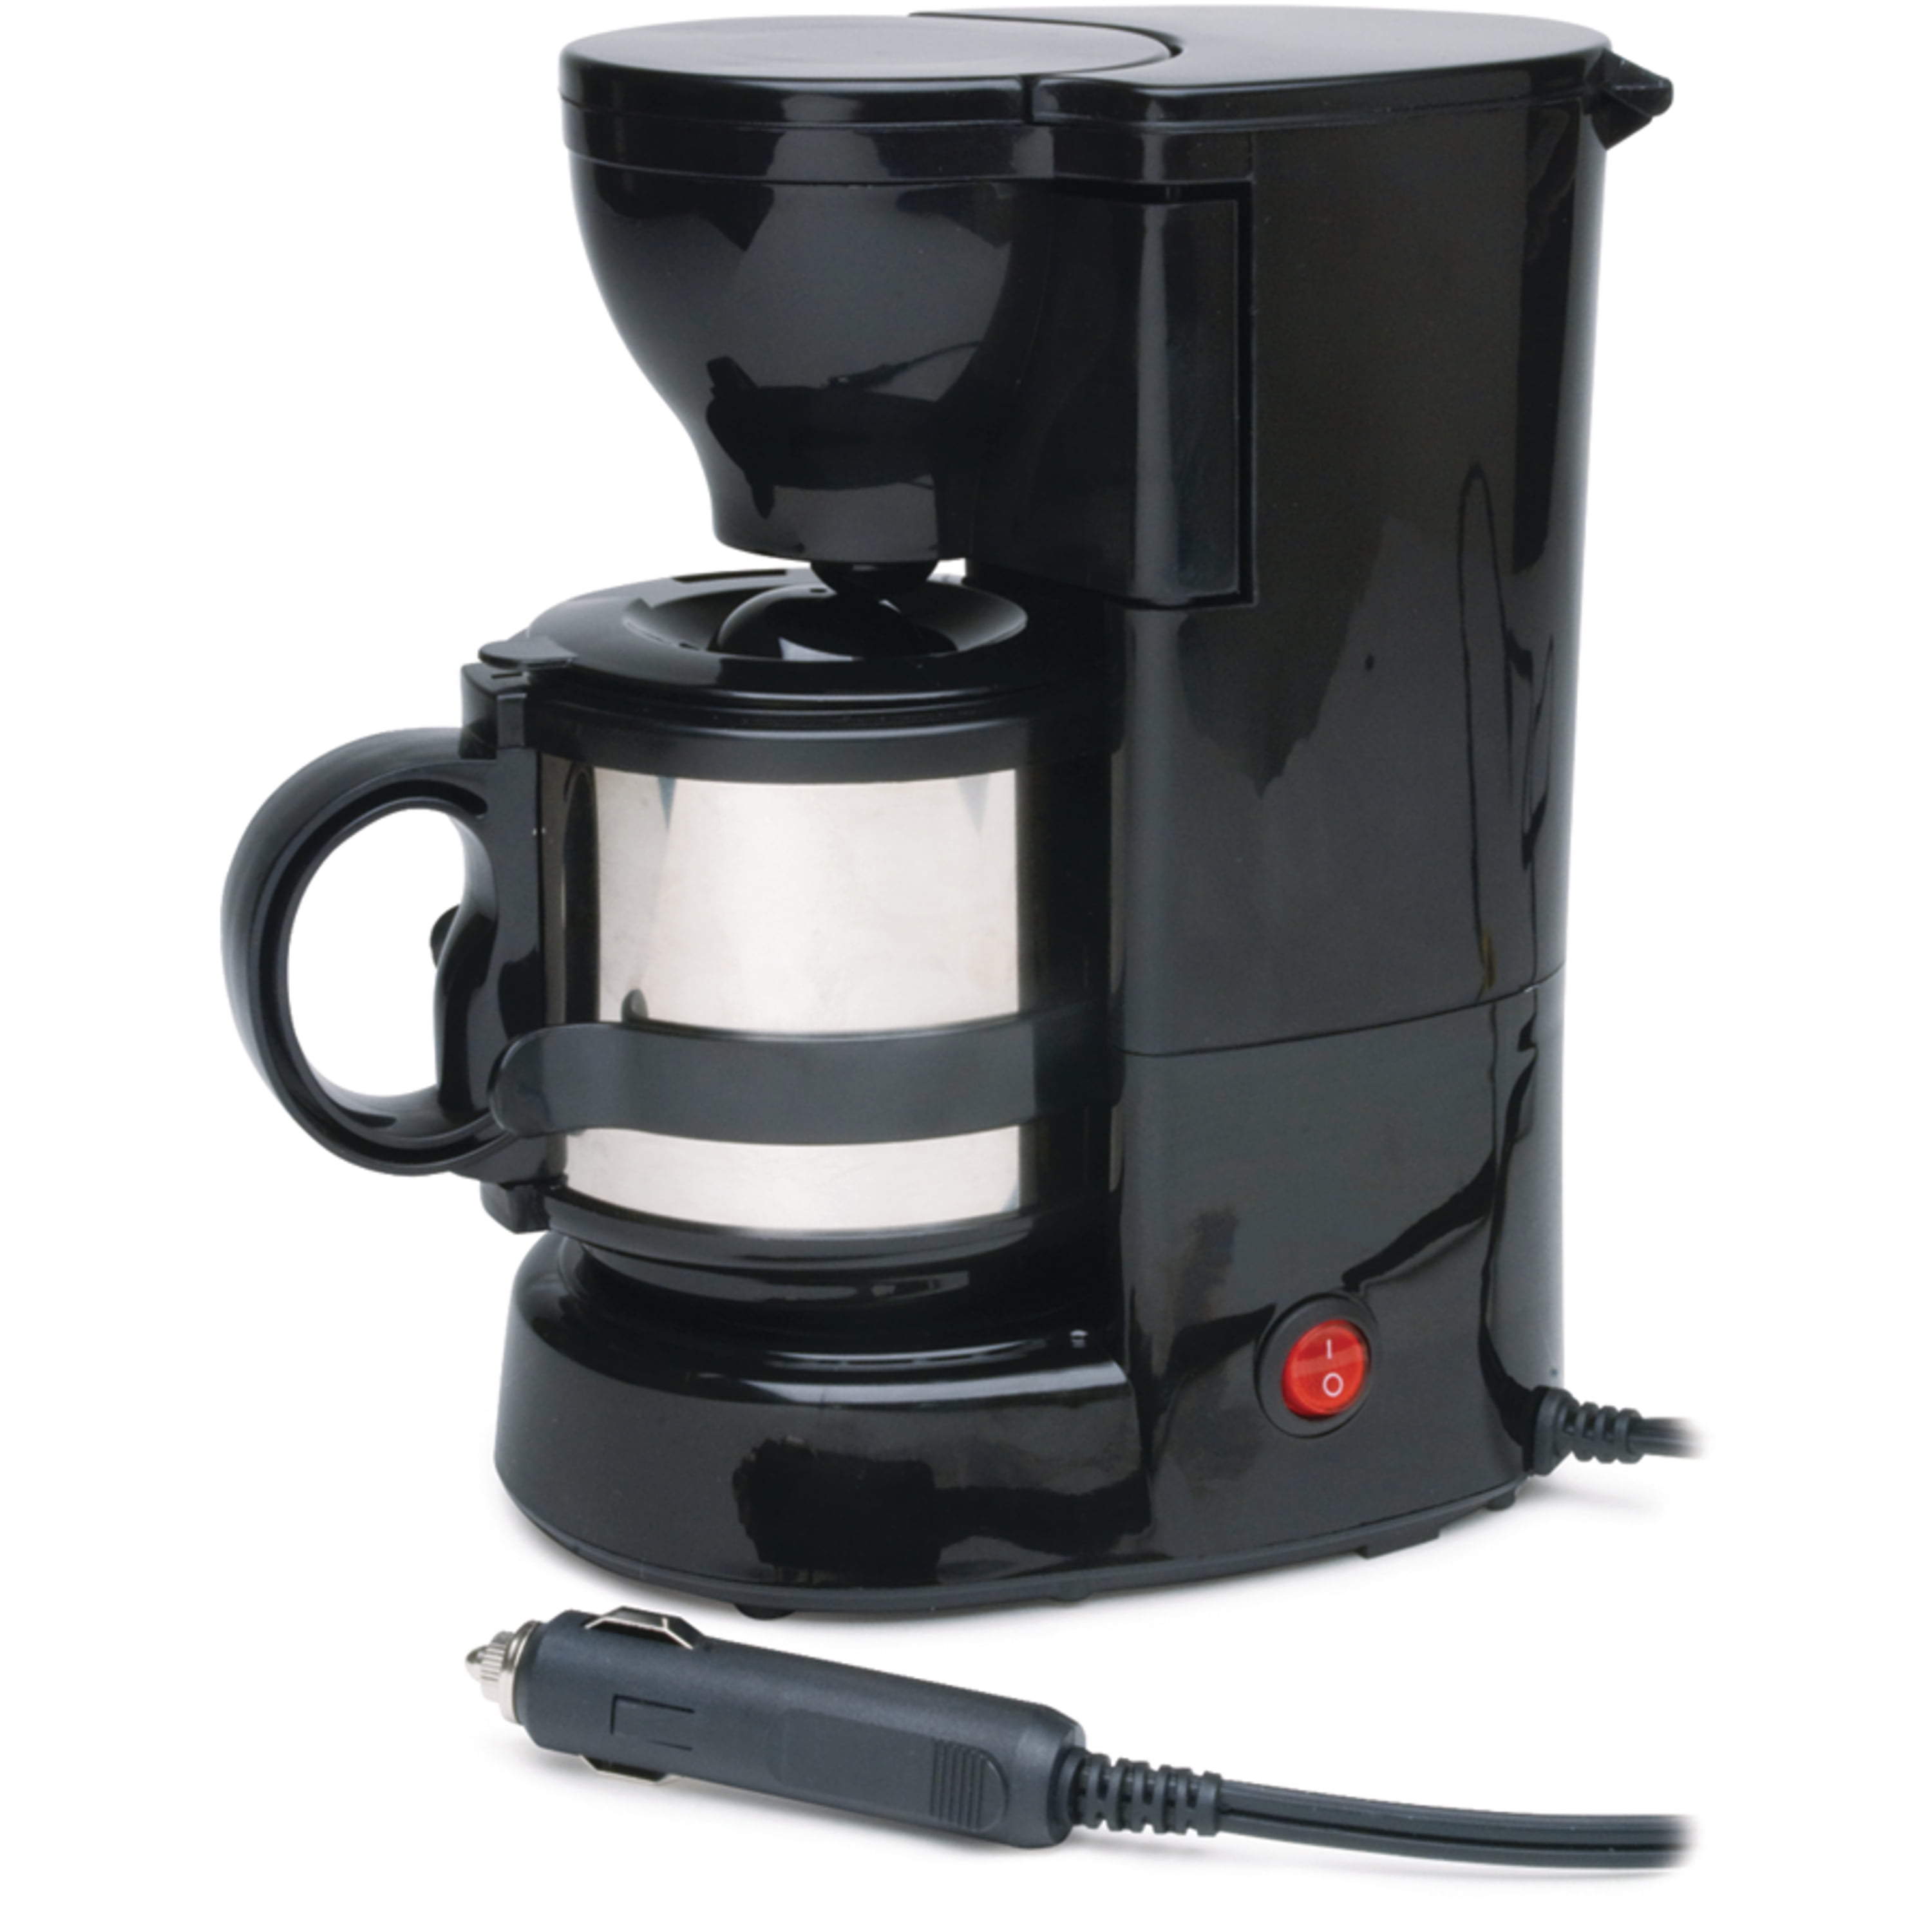  12 Volt Coffee Makers For Rv